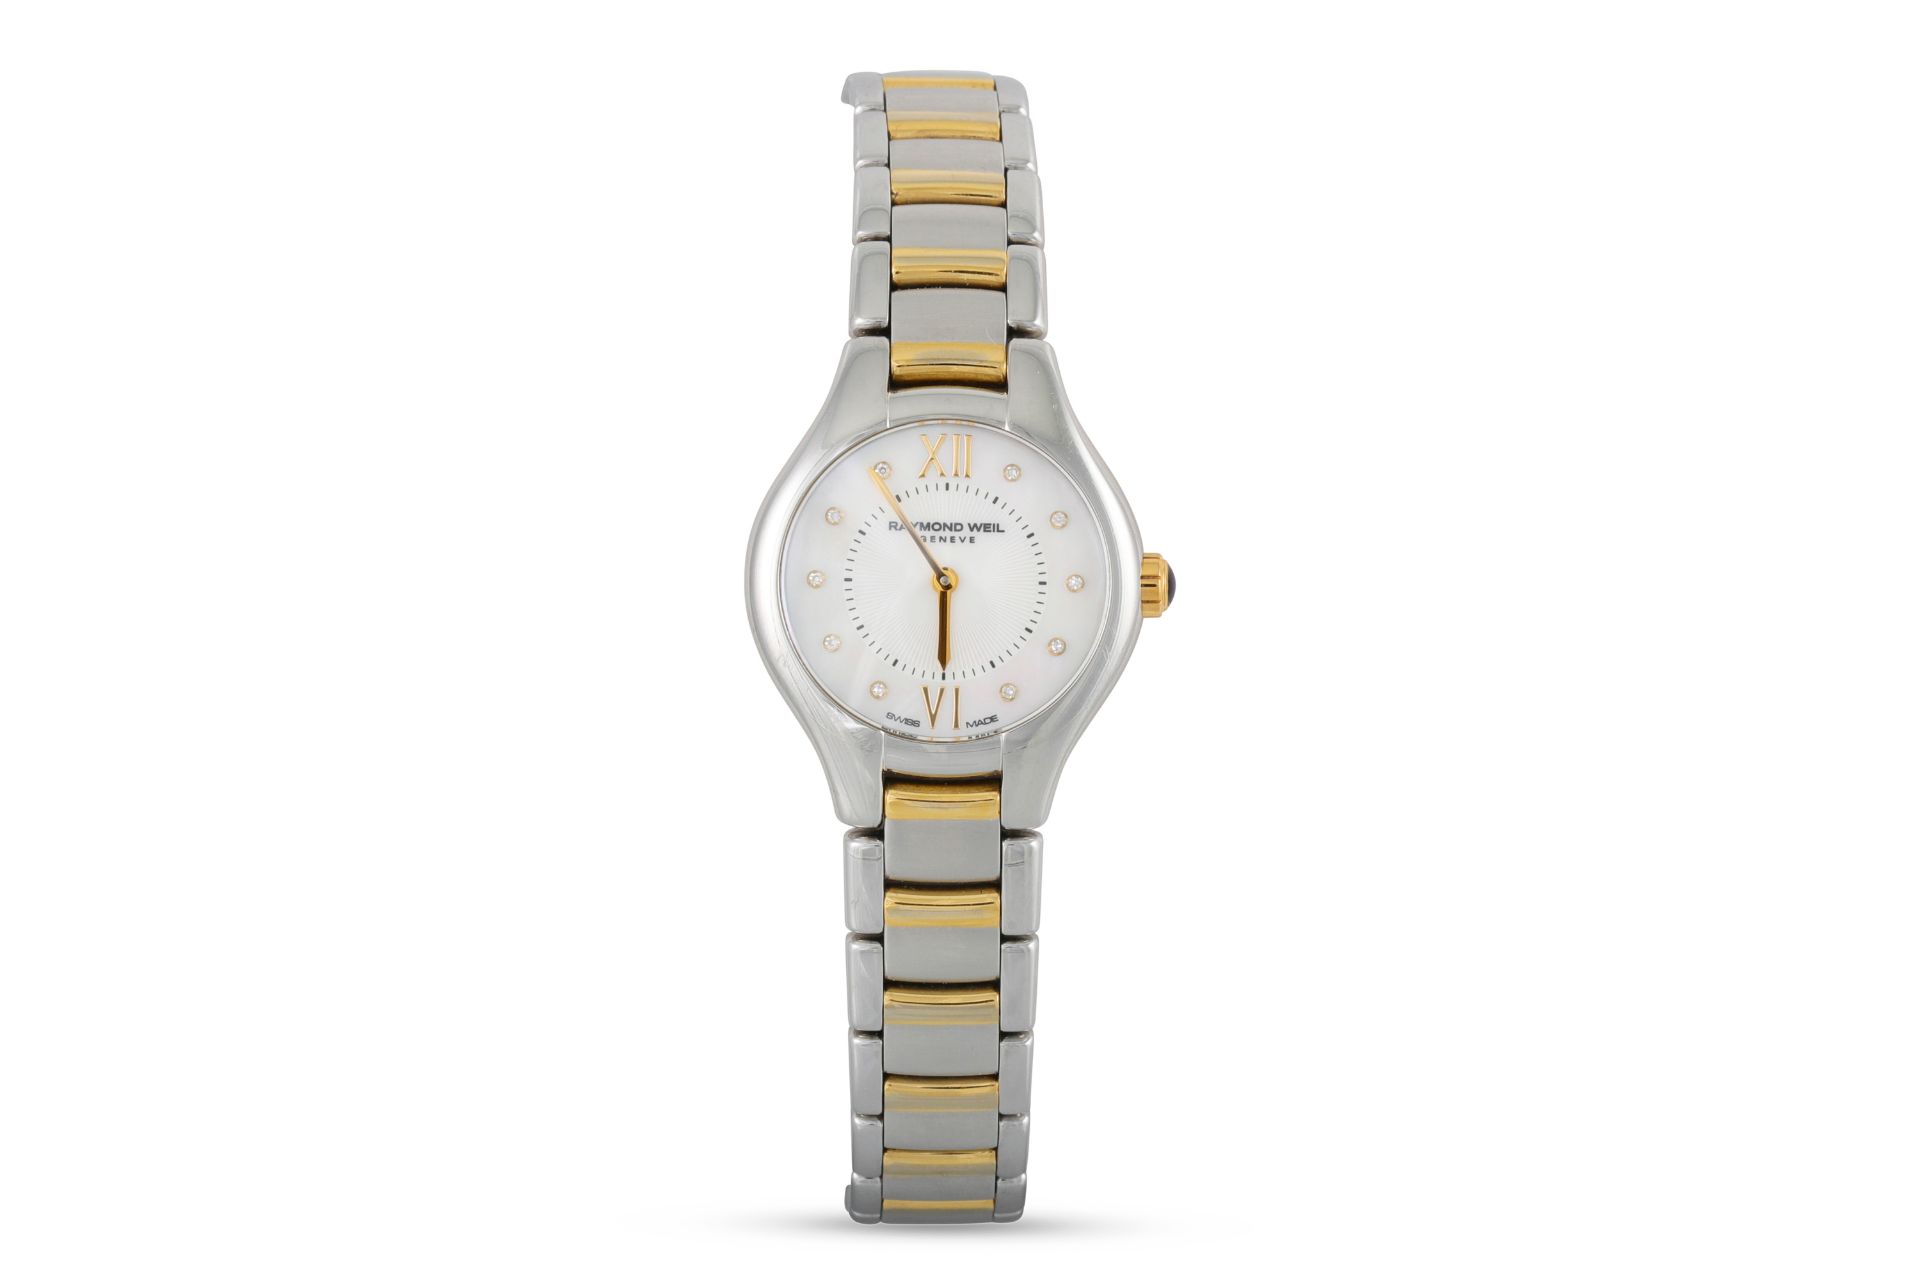 A LADY'S BI-METAL RAYMOND WEIL WRIST WATCH, mother-of-pearl dial, bracelet strap, boxed with spare